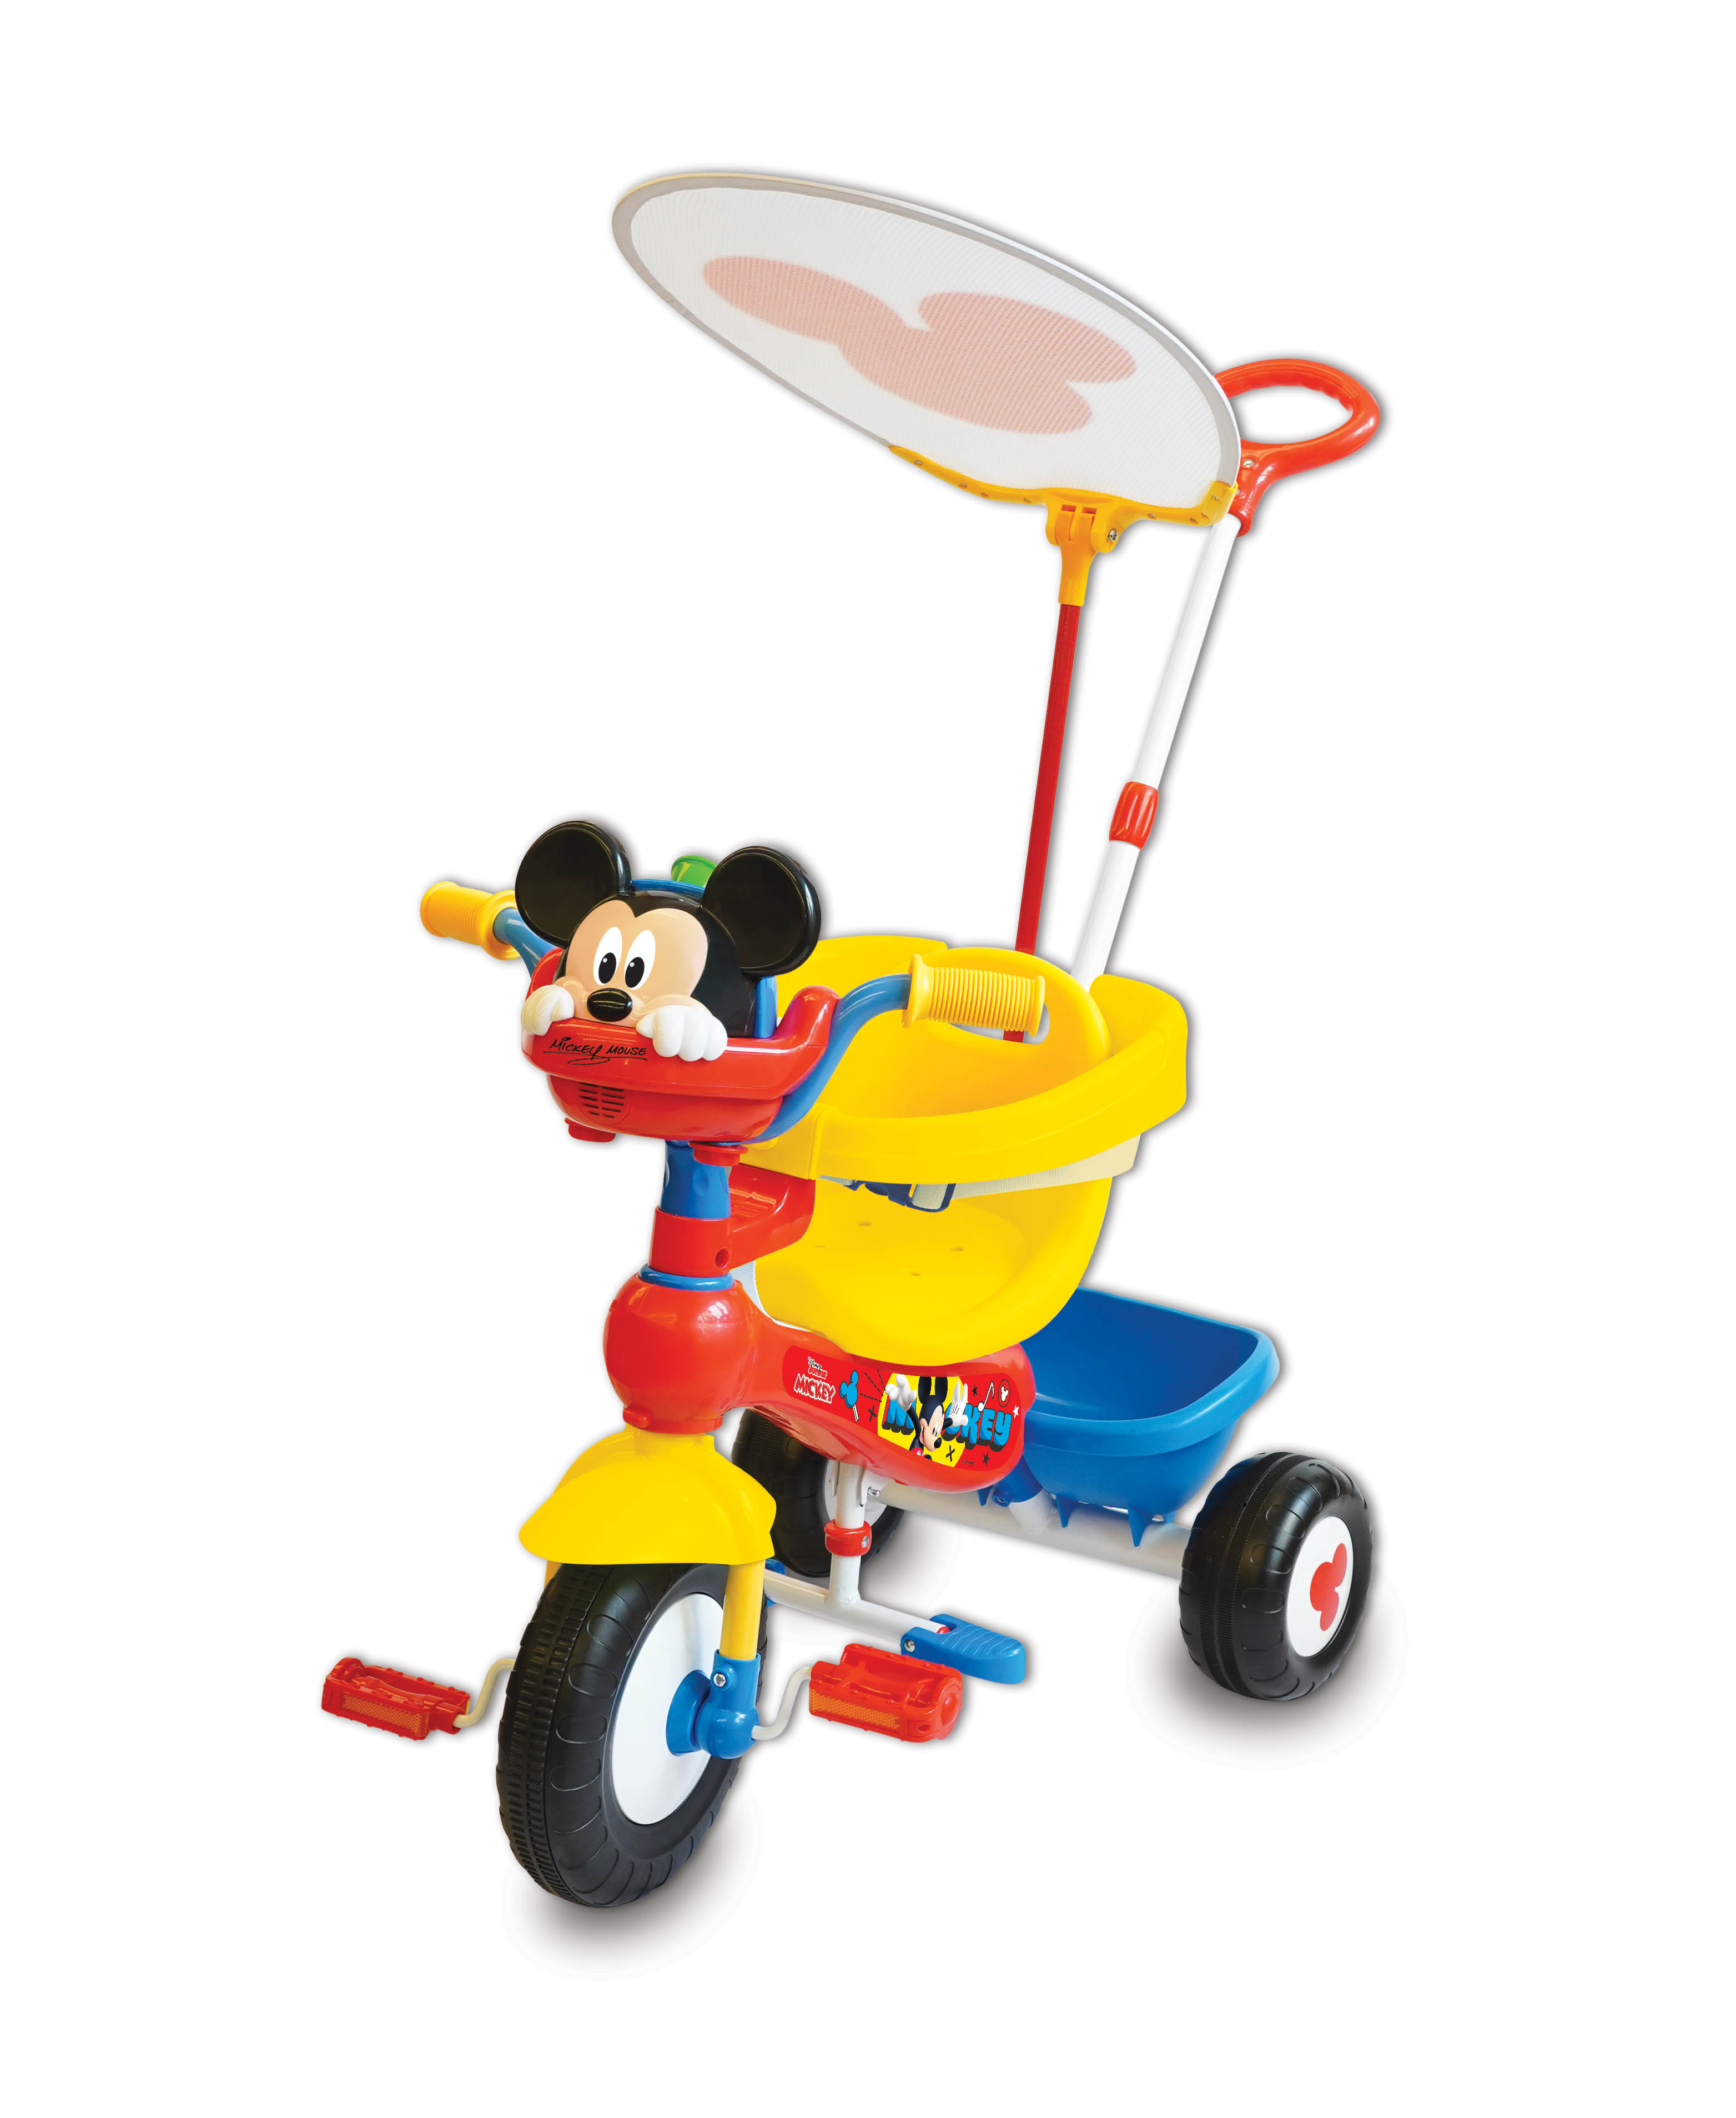 Kiddieland Disney Mickey Mouse Clubhouse Deluxe Push N’ Ride Trike